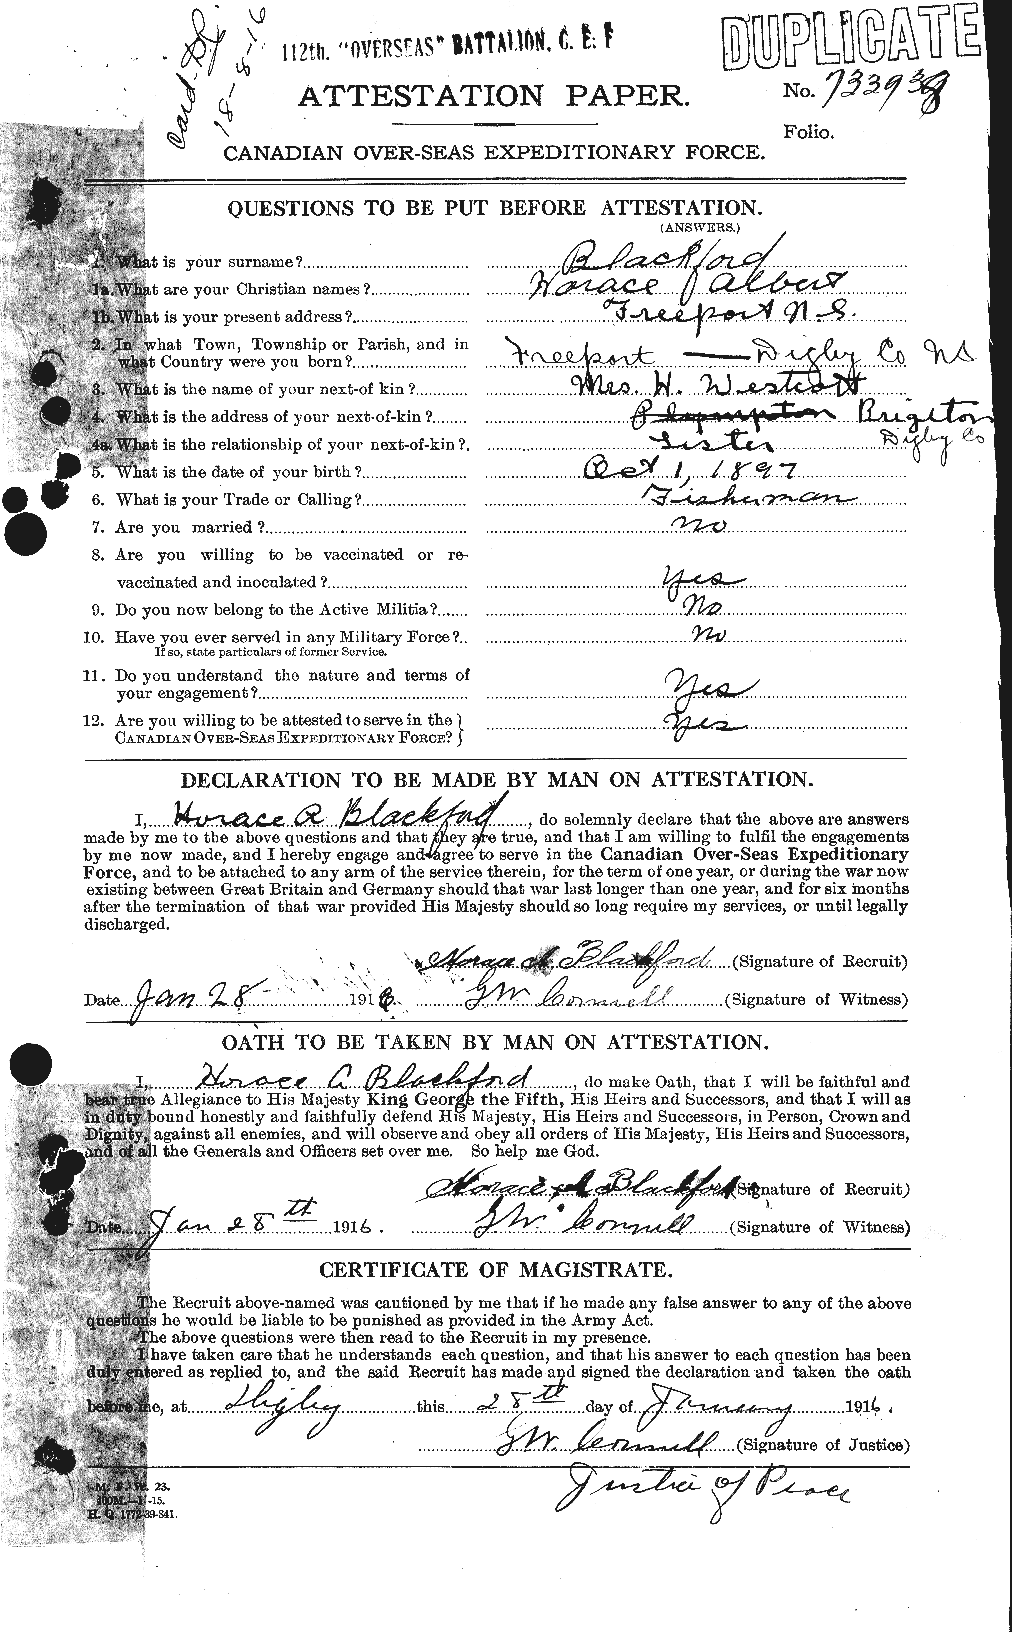 Personnel Records of the First World War - CEF 246463a